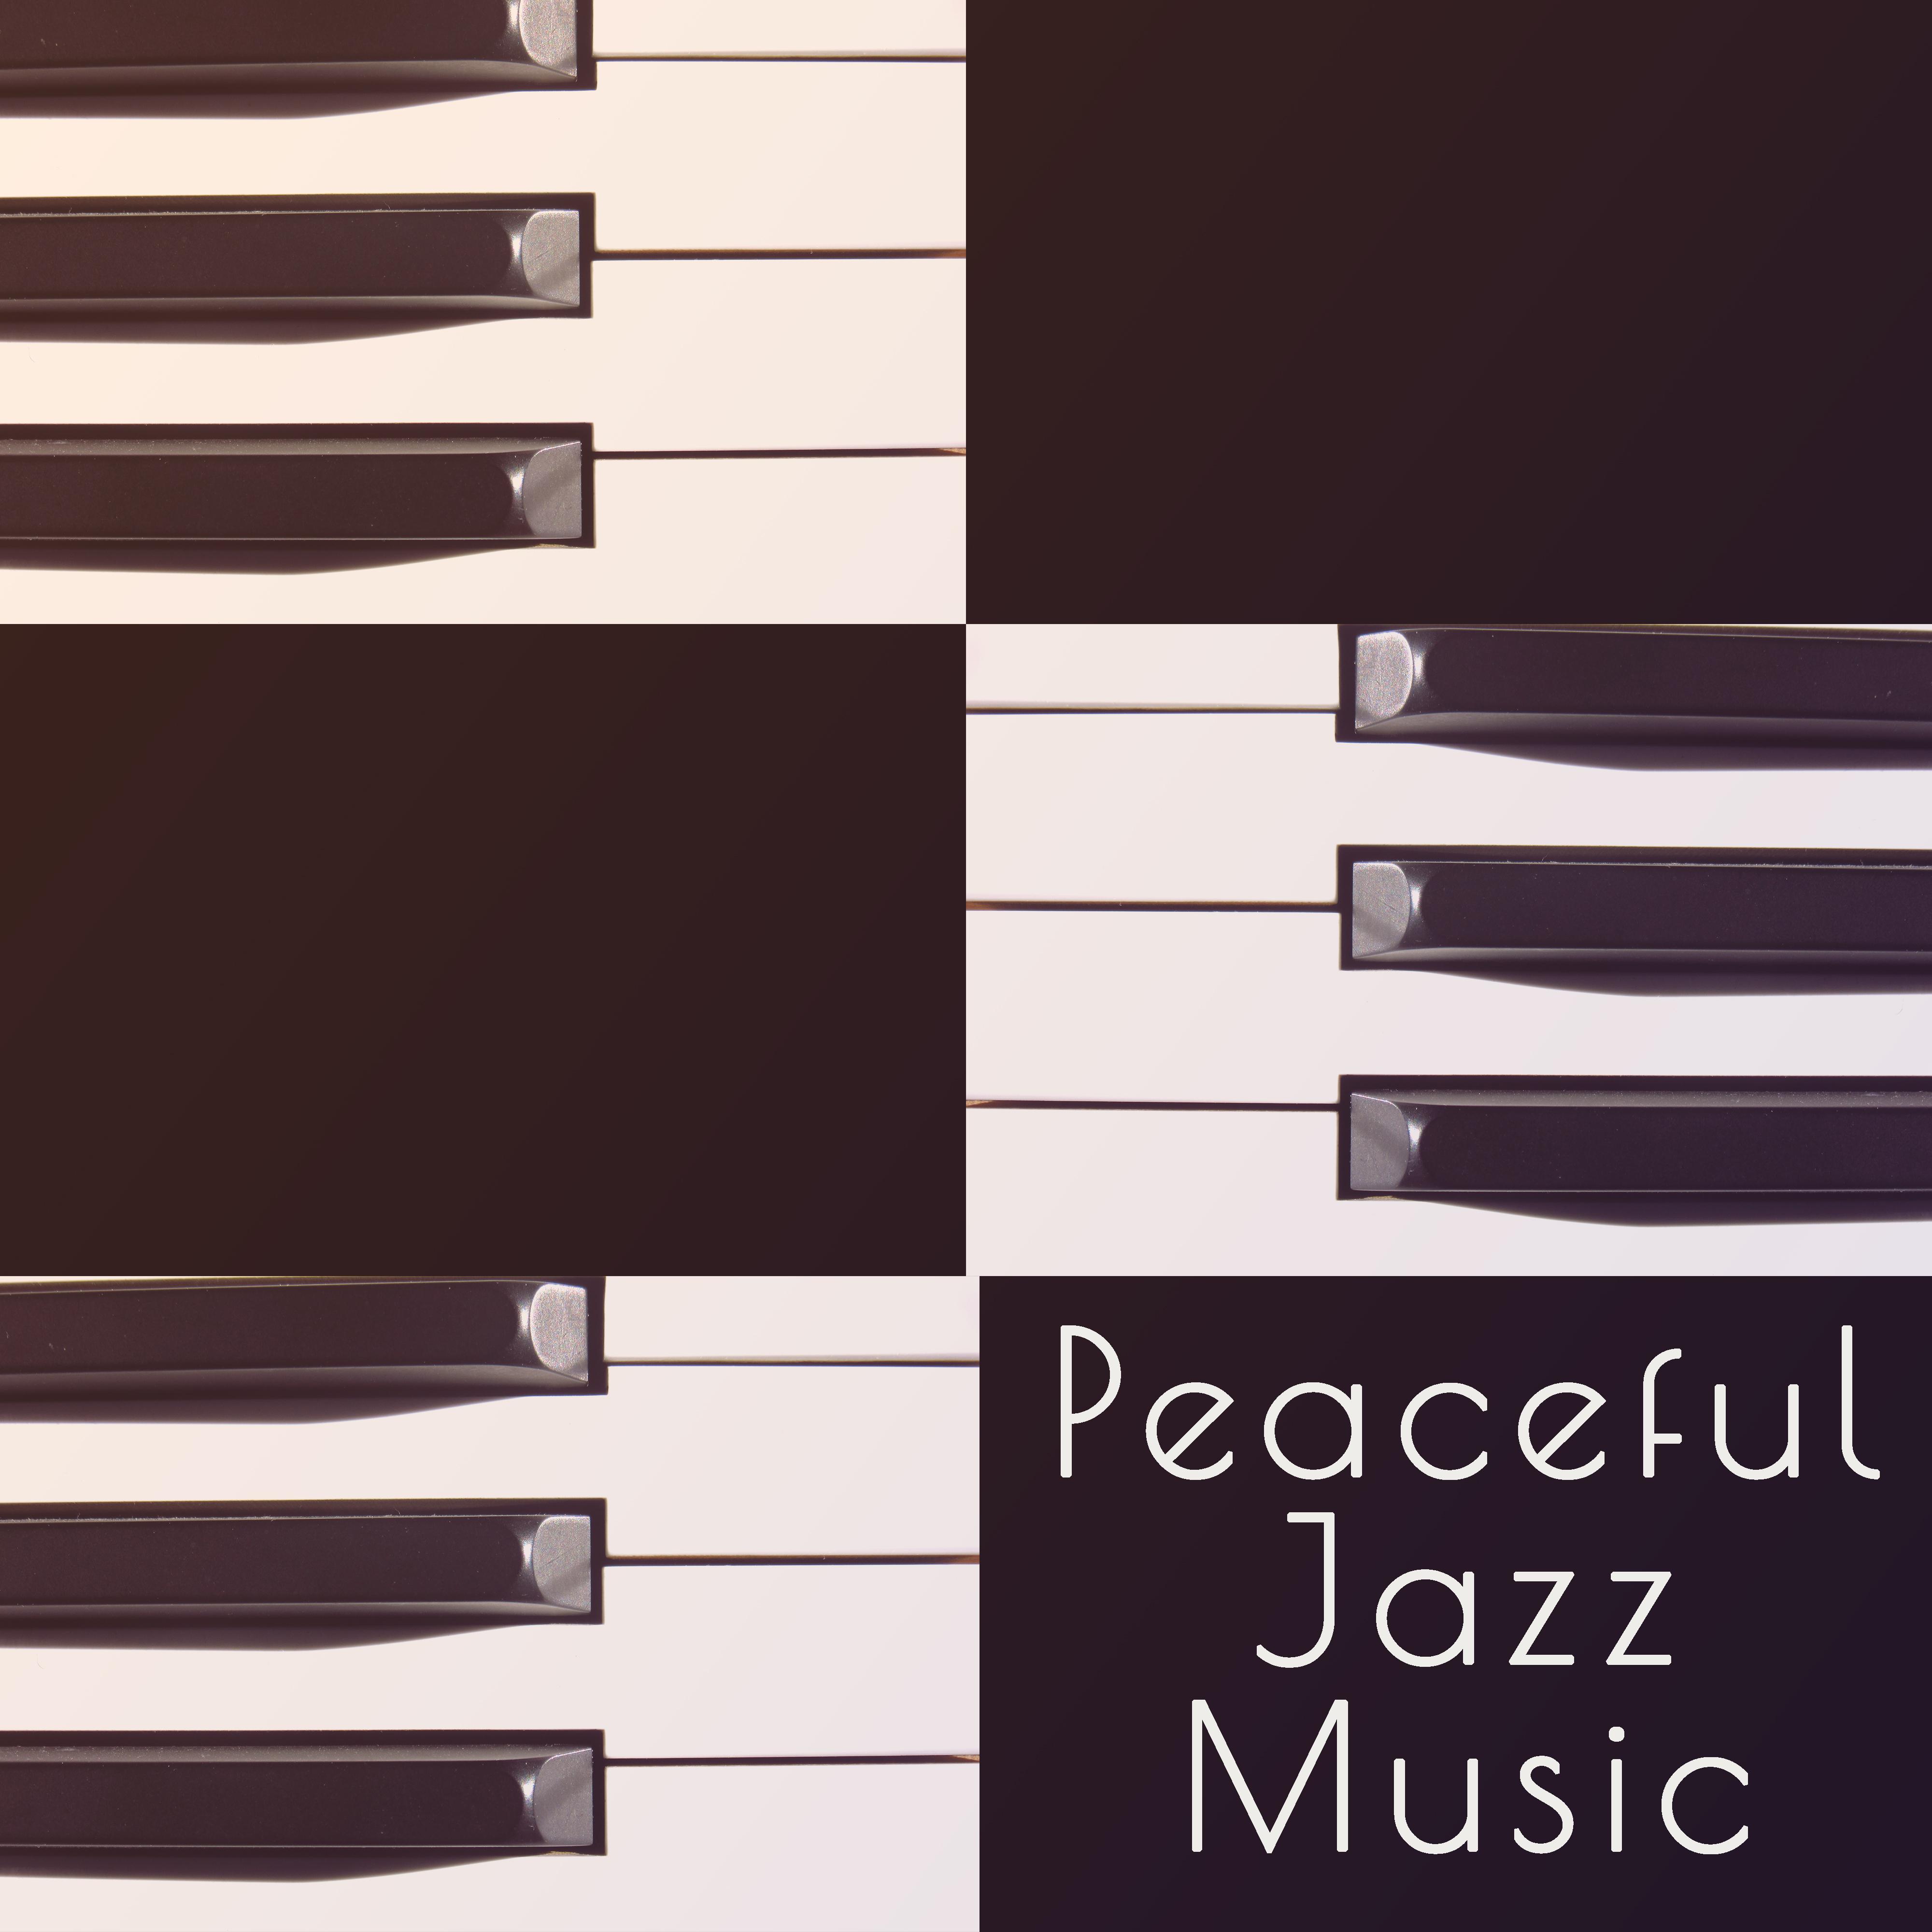 Peaceful Jazz Music – Soft Vibes, Jazz Cafe, Restaurant Music, Mellow Jazz for Relaxation